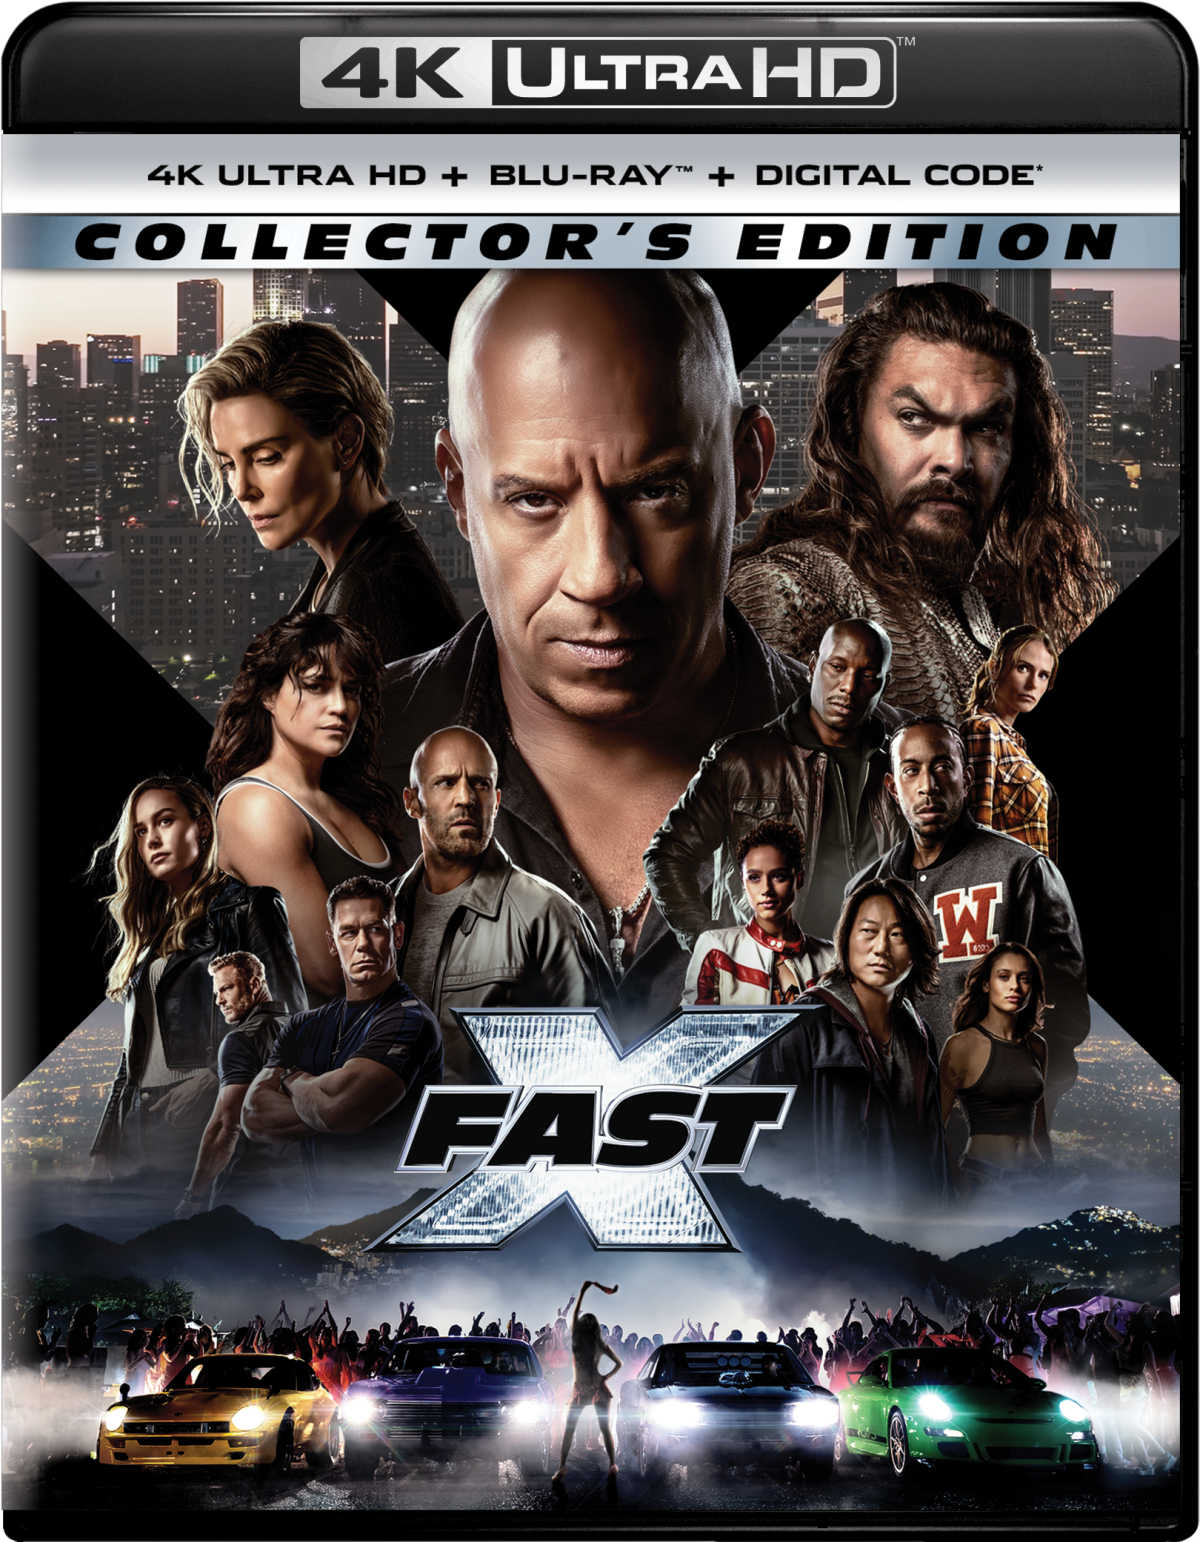 The Fast Saga is back with Fast X, now available on home entertainment! Get ready for the ultimate family reunion with Vin Diesel, Michelle Rodriguez, John Cena, and more.